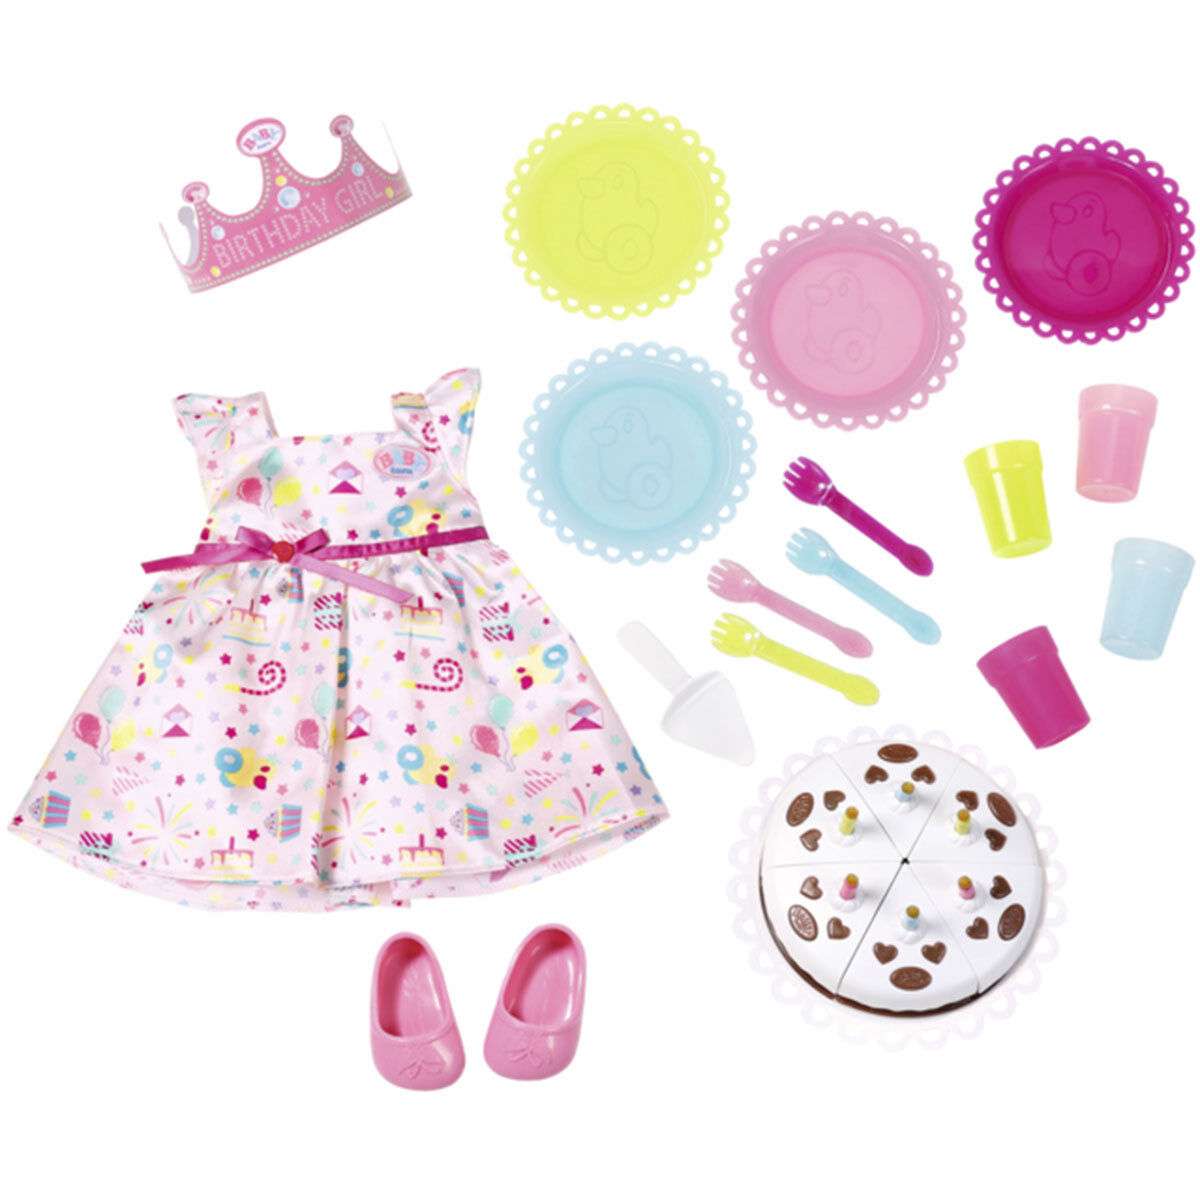 Baby Born - Deluxe Party Set (825242)